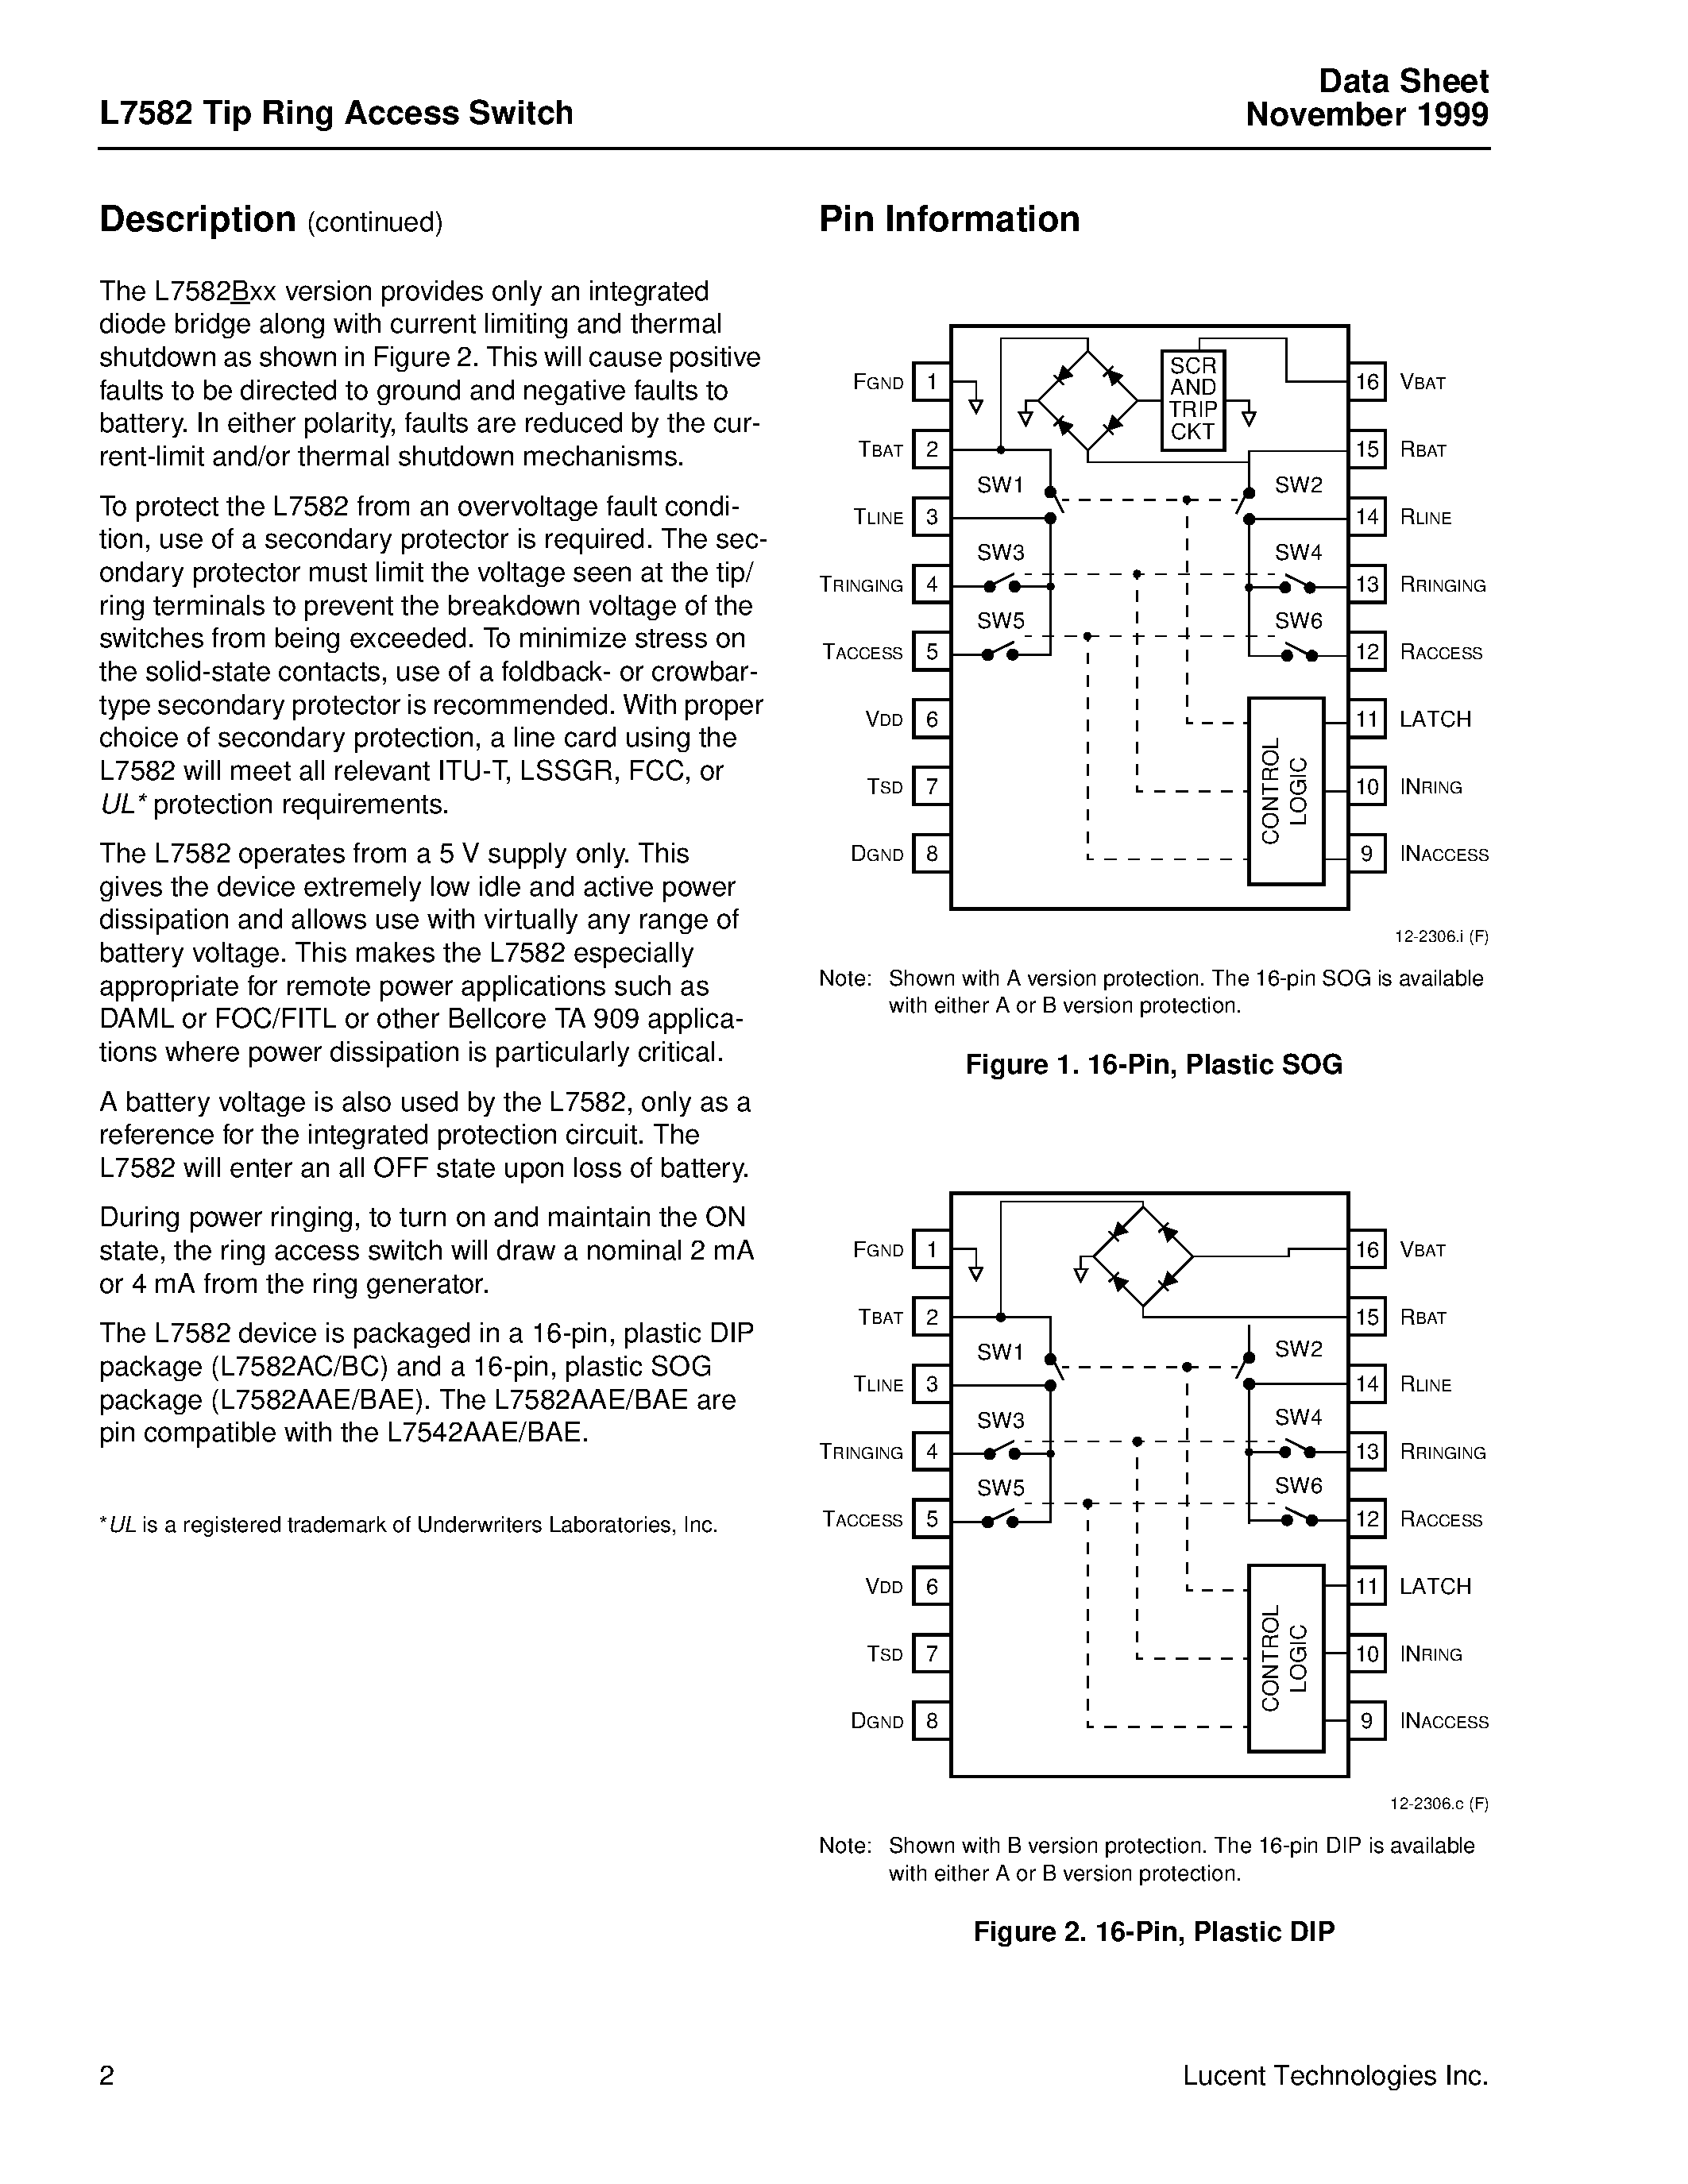 Datasheet ATTL7582BC - Tip Ring Access Switch page 2